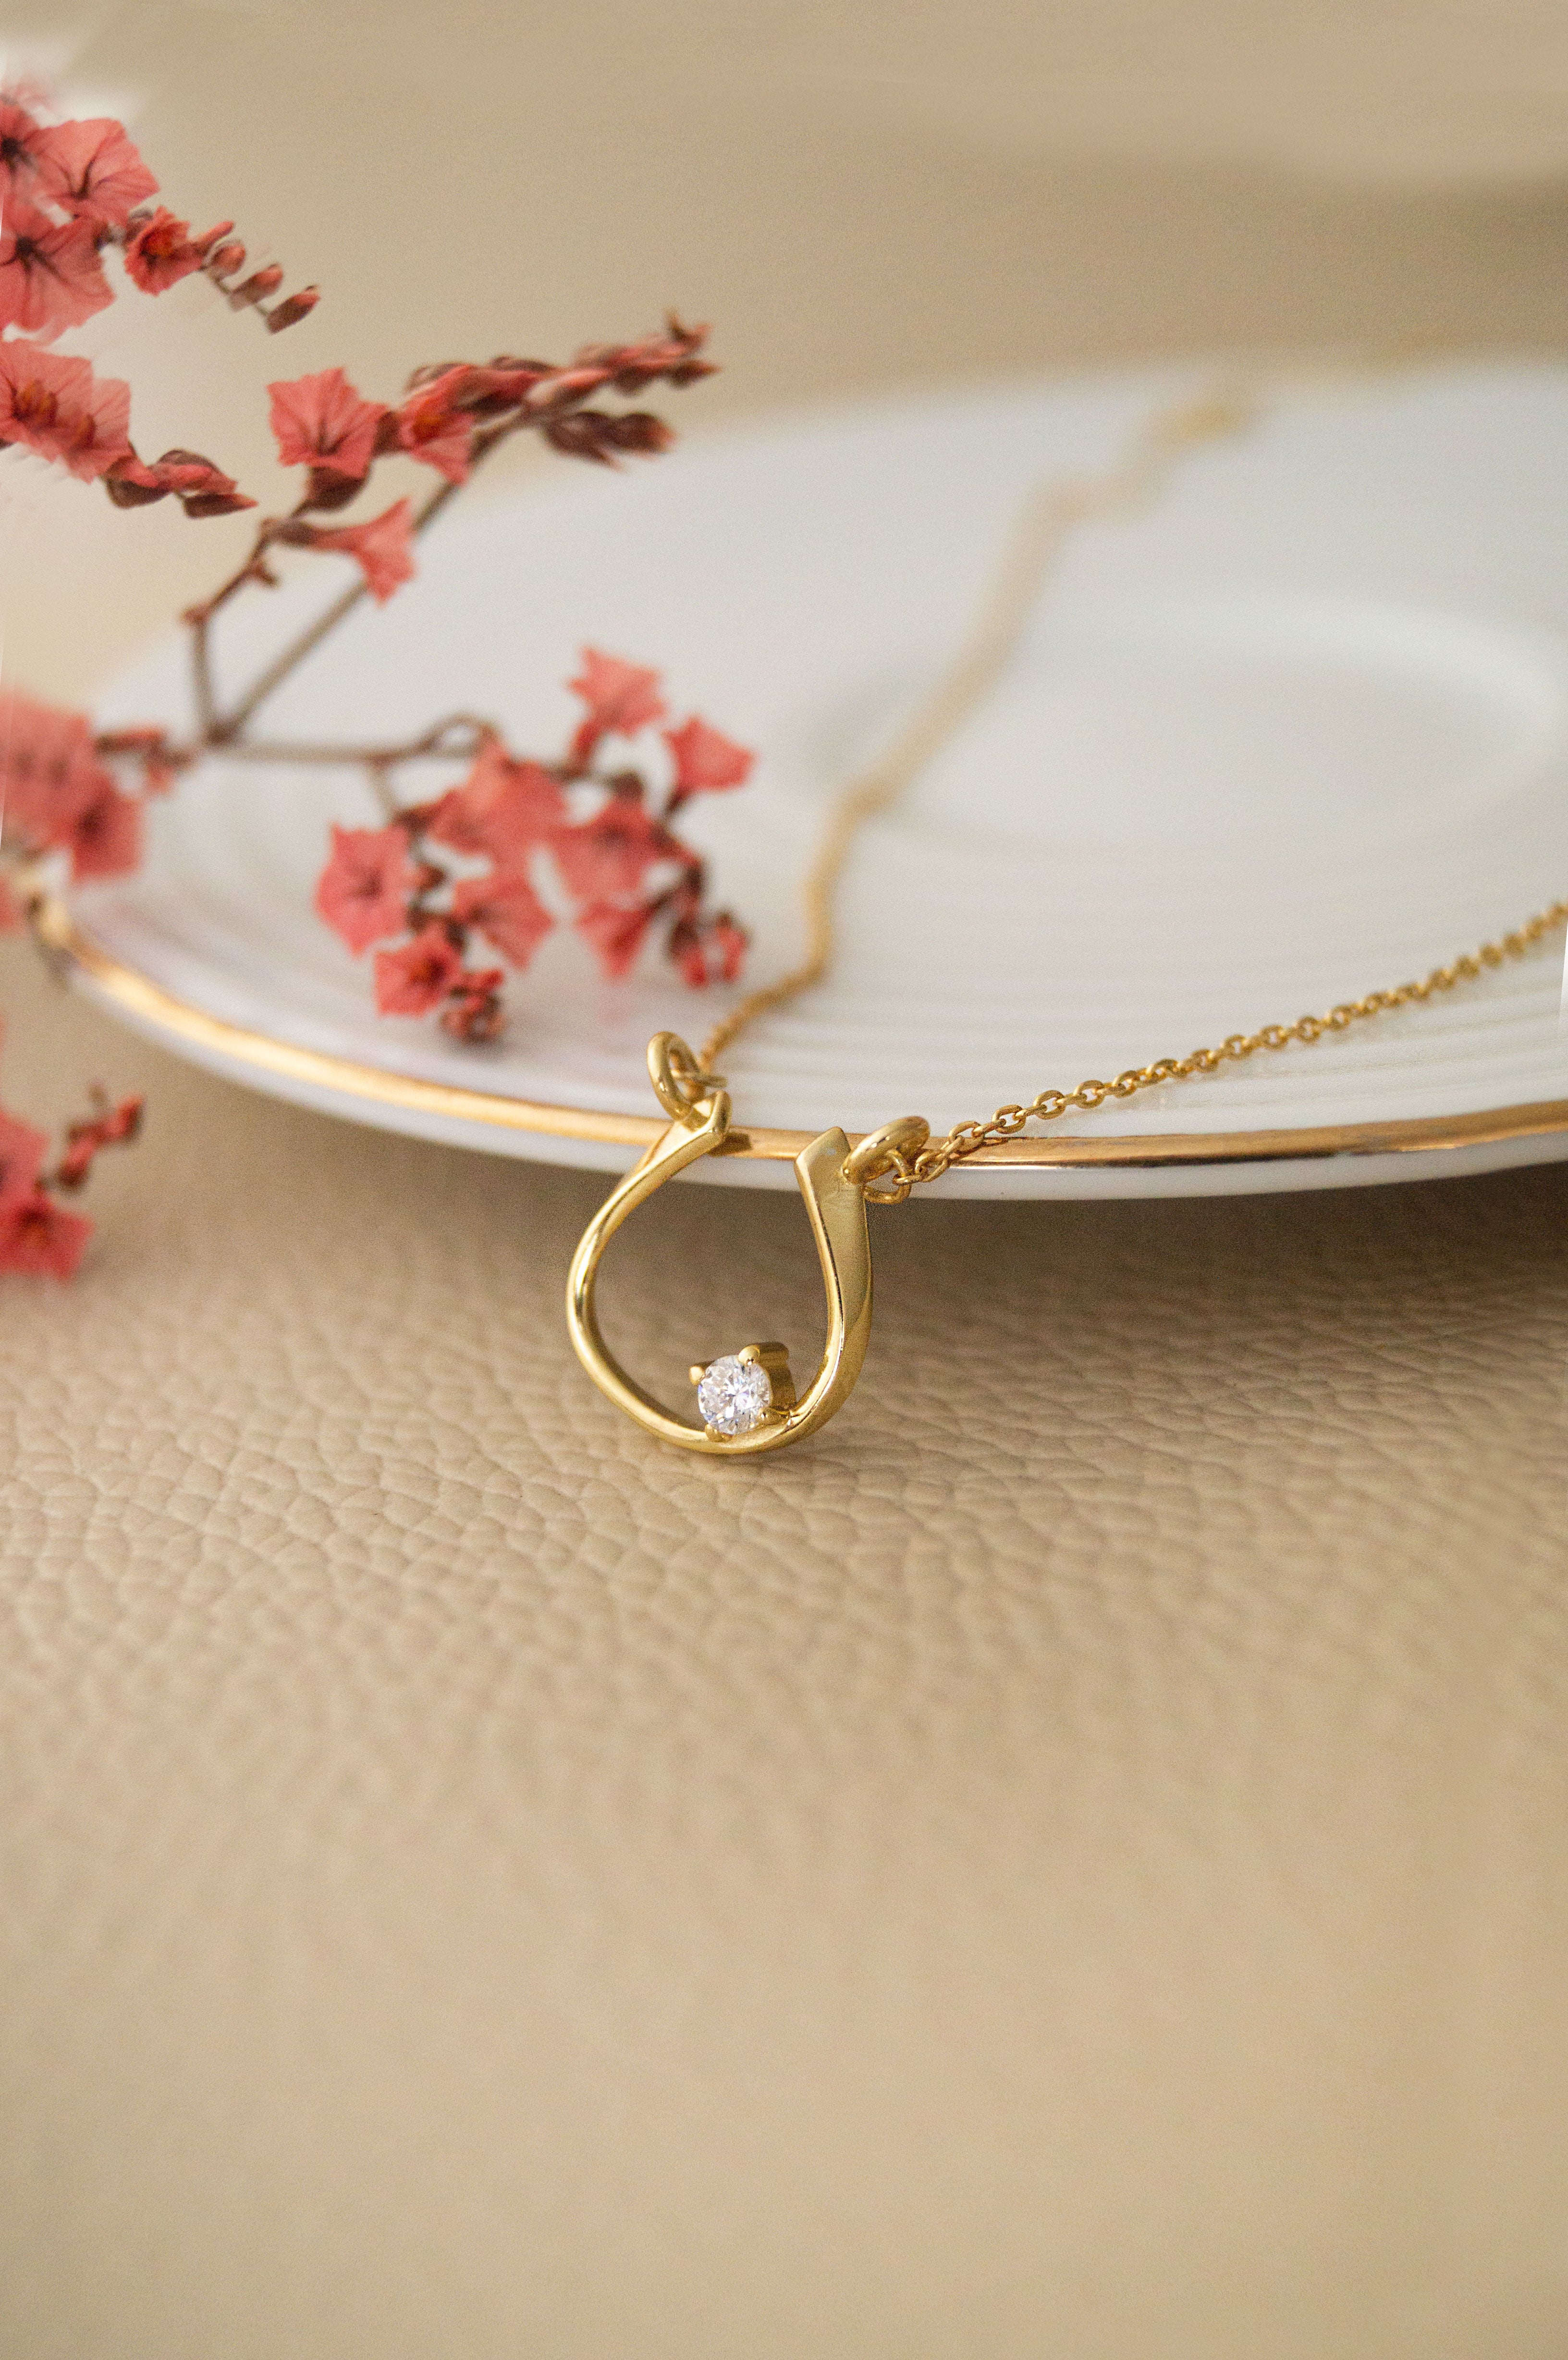 Ring Holder Necklace Gold Wishbone, Silver Engagement Ring Keeper, Good  Luck Pendant, Dainty Jewelry, Gift for Doctor Nurse - Etsy [Video] [Video]  | Ring holder necklace, Ring pendant necklace, Necklace